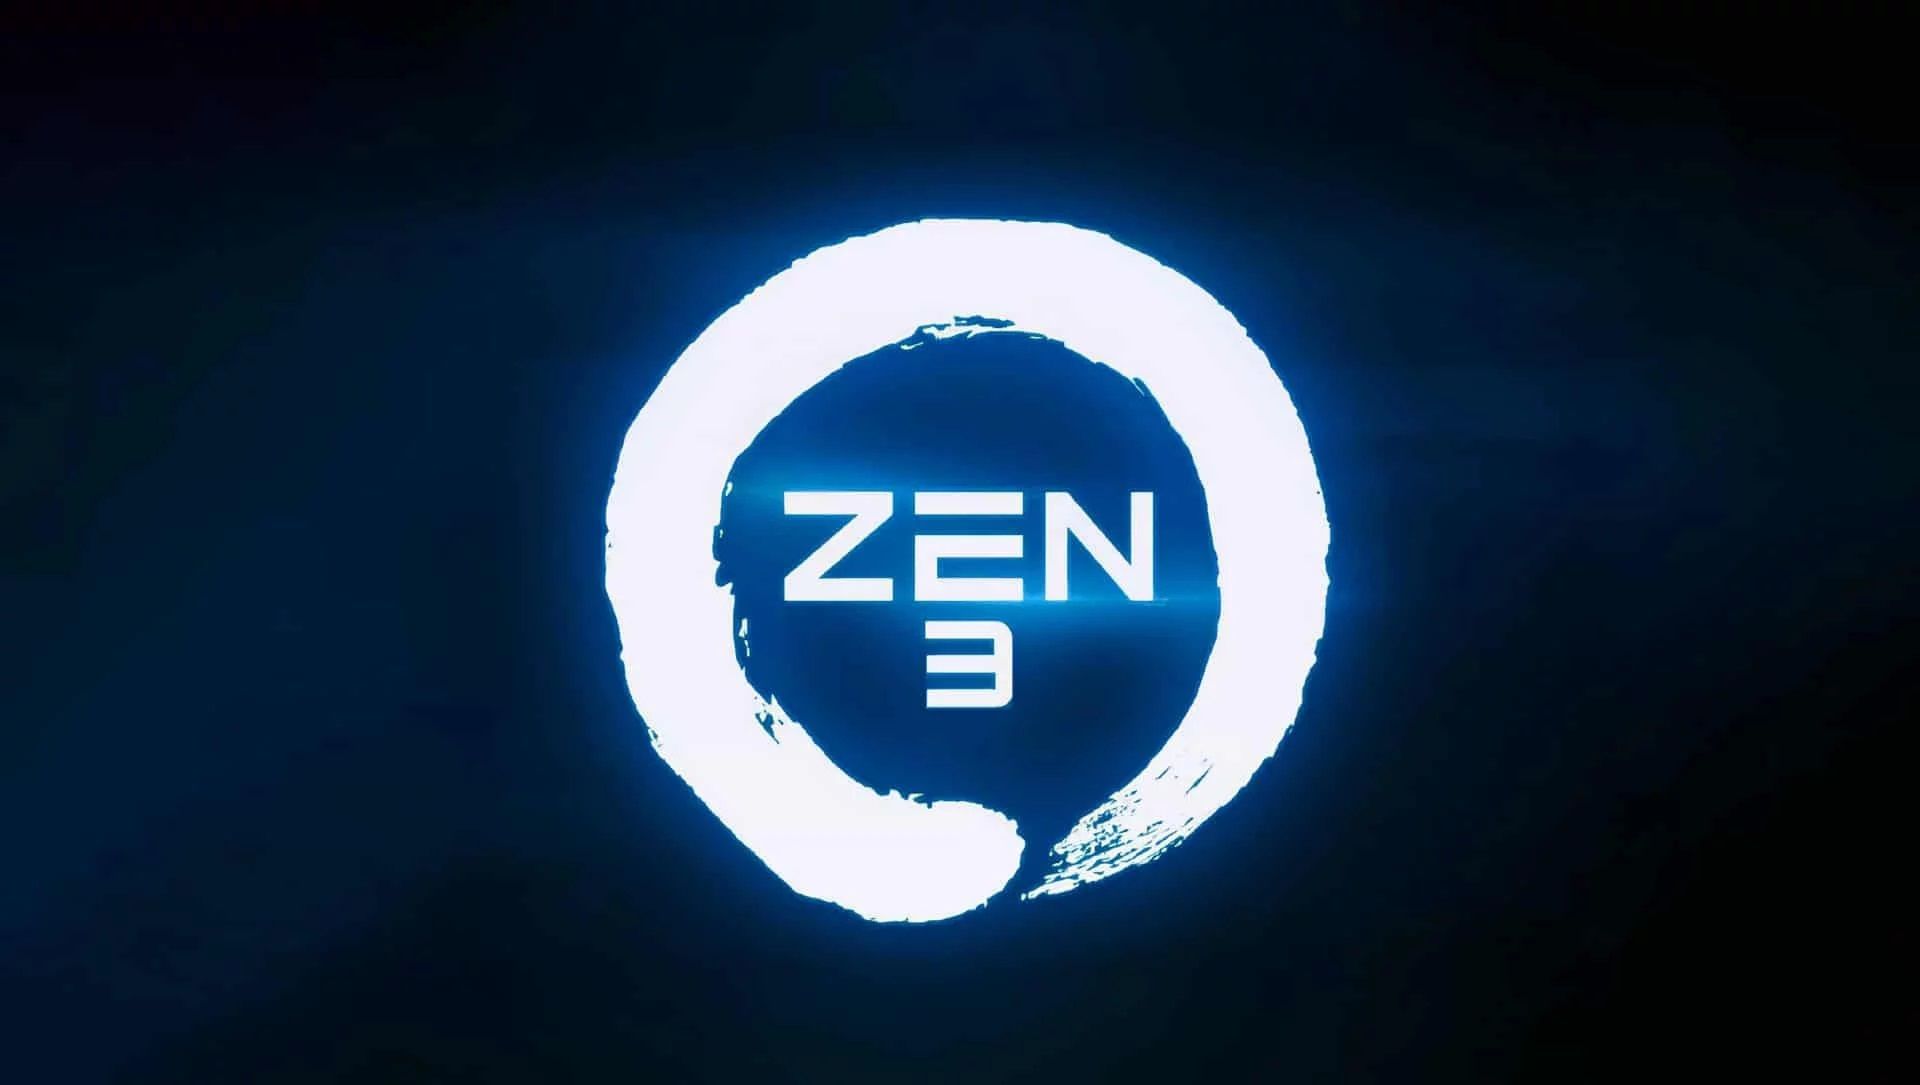 AMD Zen 3 Microarchitecture to Be Unveiled at CES 2020